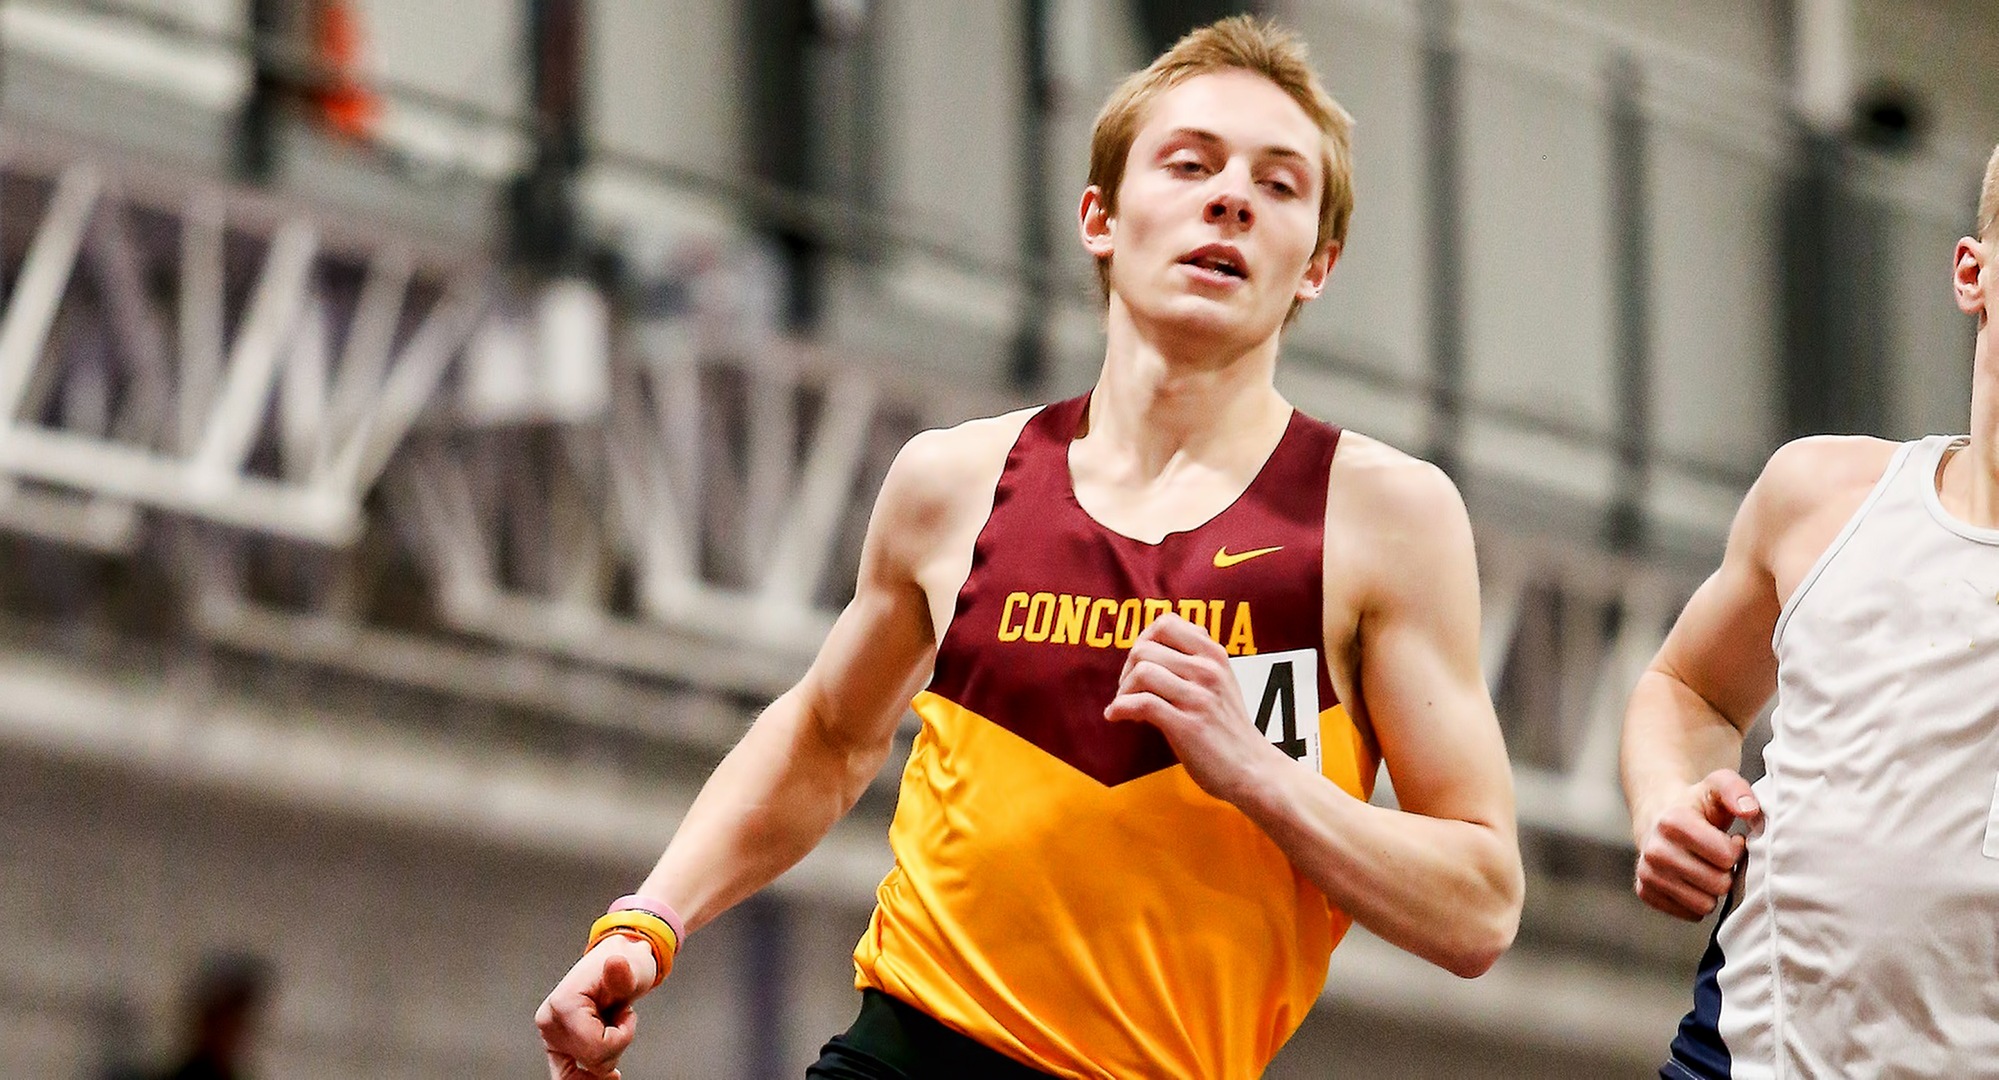 Sophomore Jesse Middendorf finished second in both the 800 and 600 meters at the NDSU Bison Open and his time in the 800 meters was the seventh fastest in DIII this year.